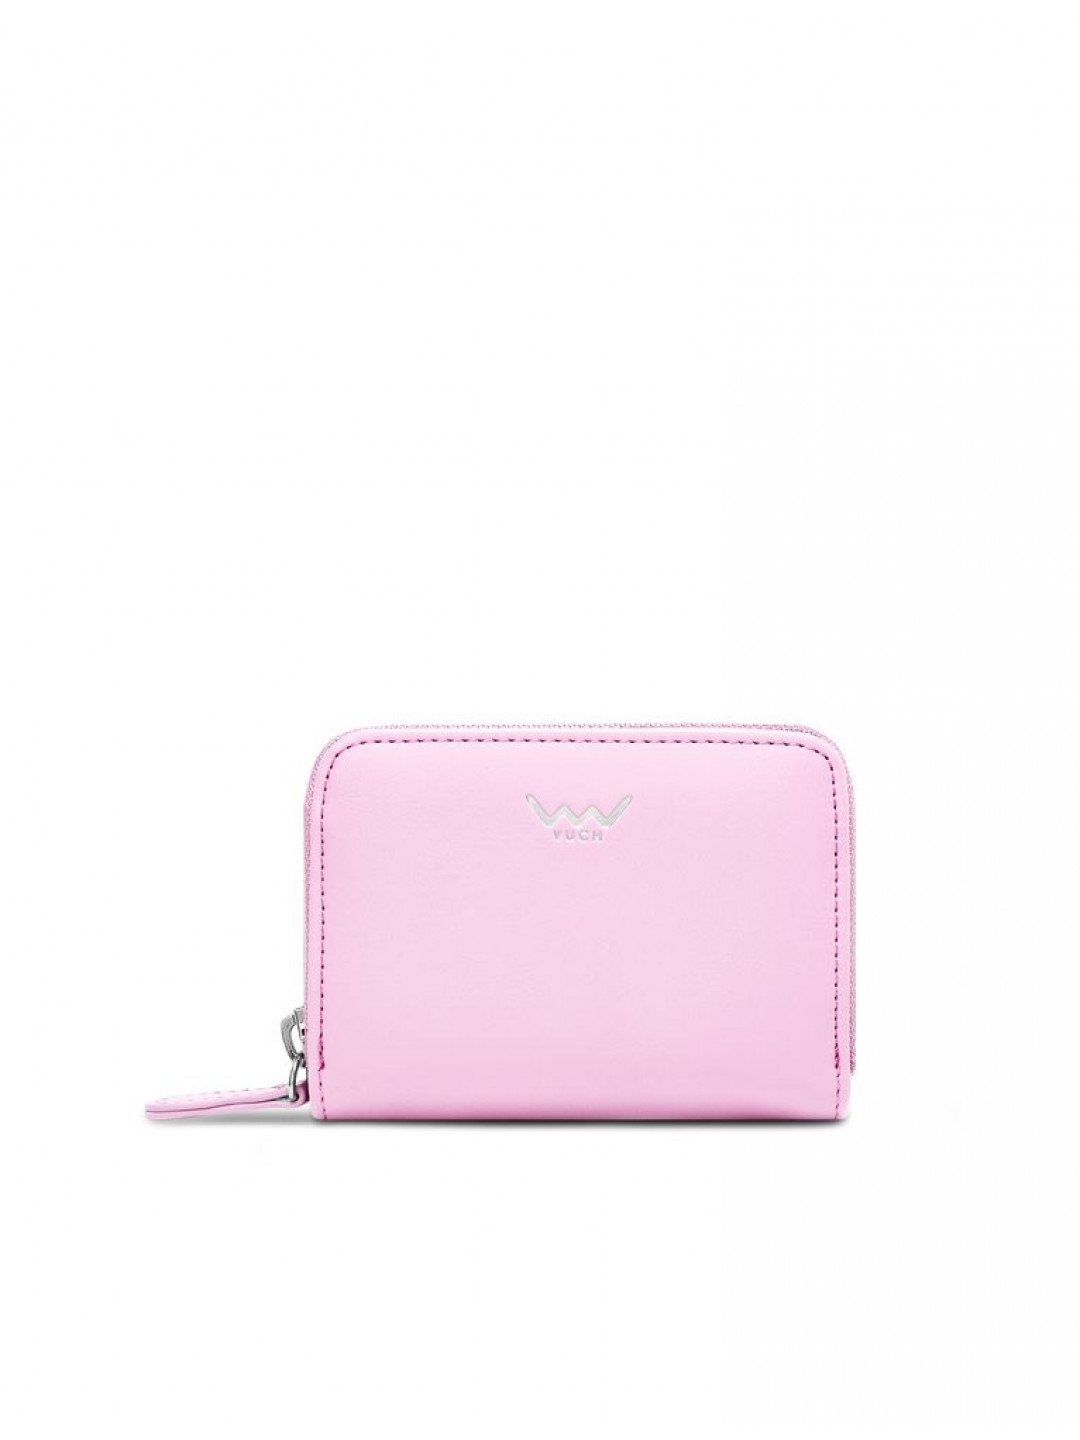 VUCH Luxia Pink